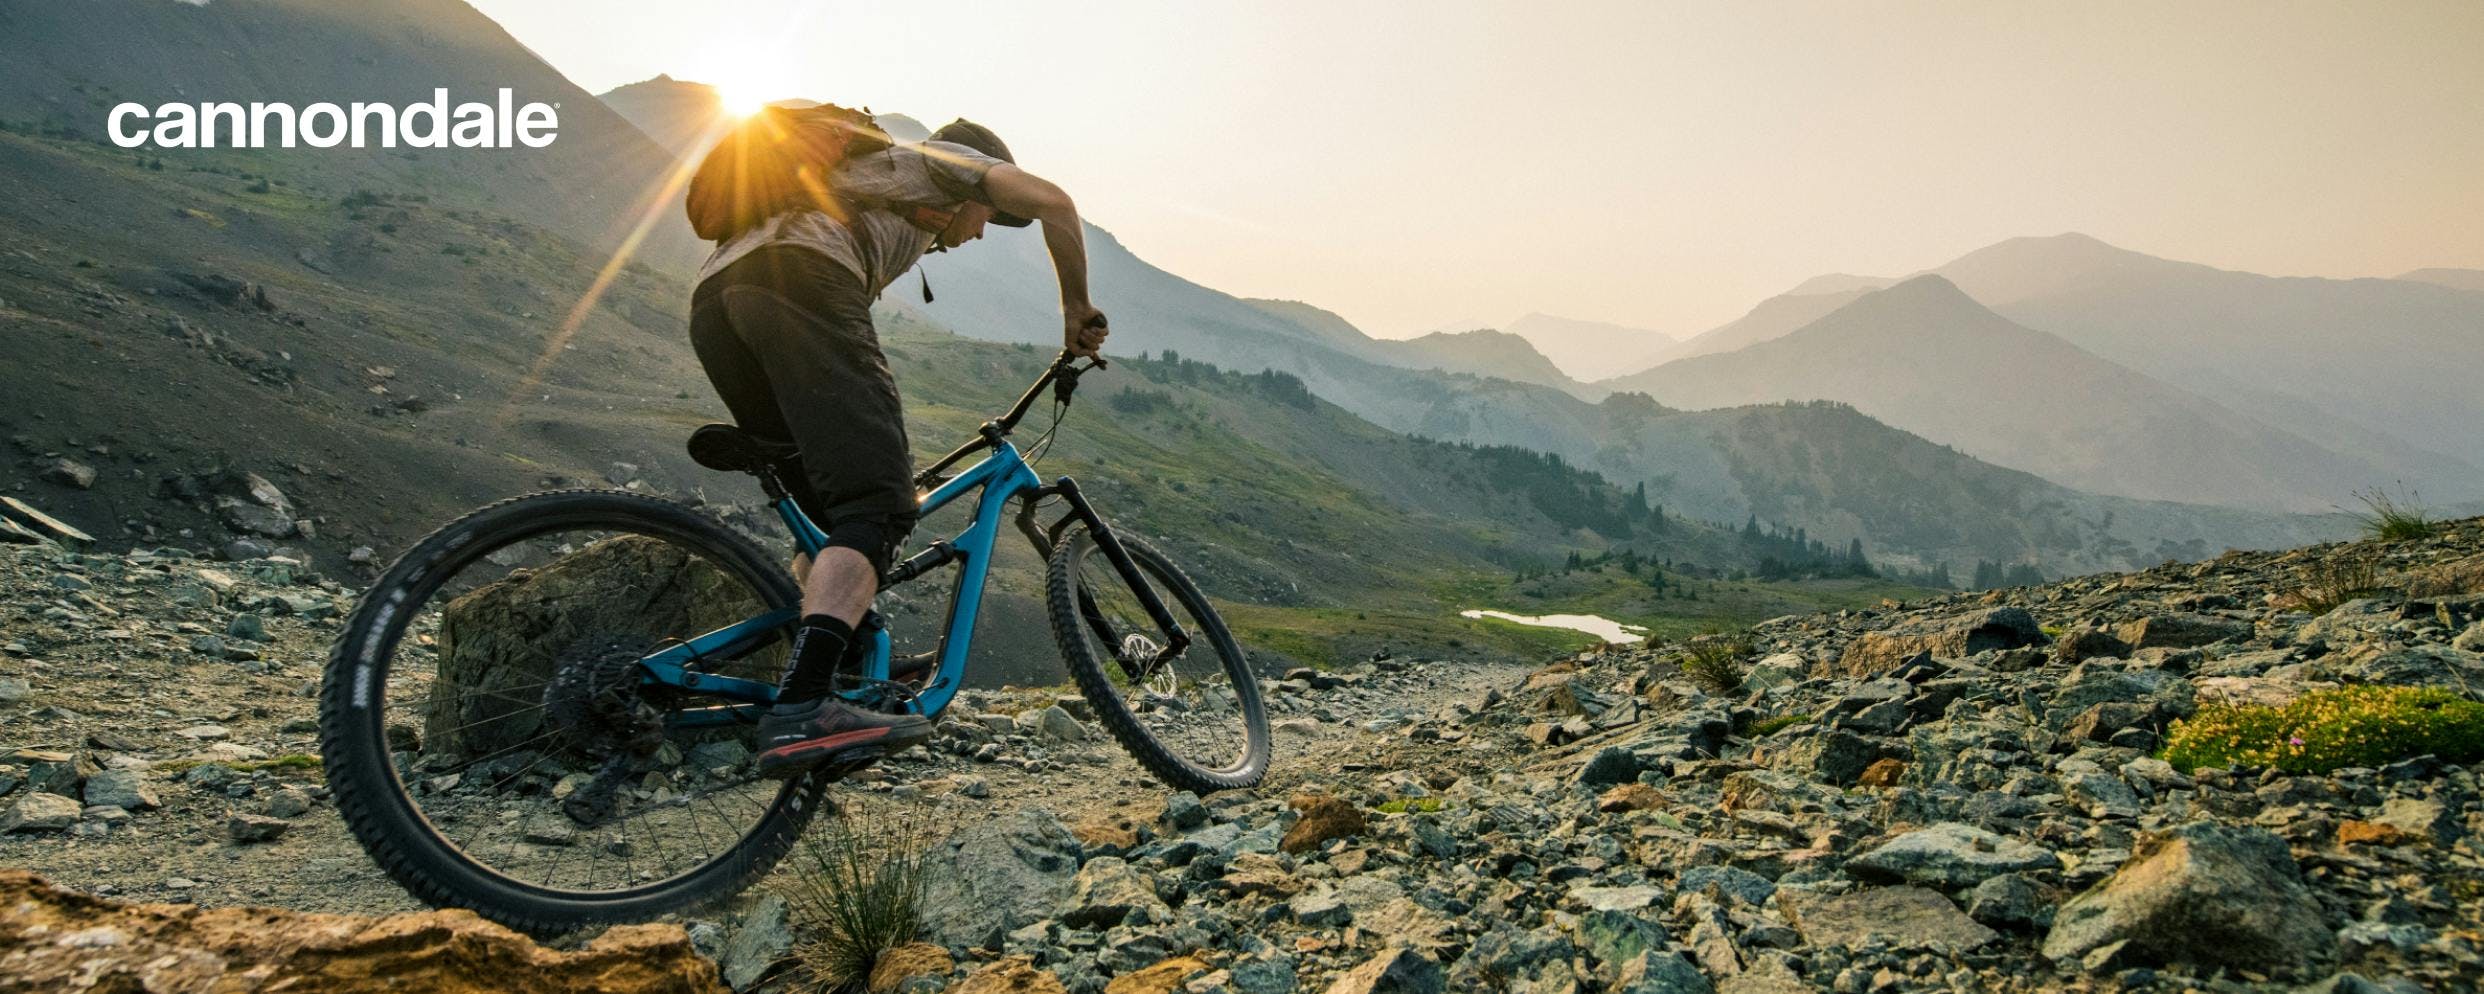 Person riding a Cannondale mountain bike in the mountains near dusk